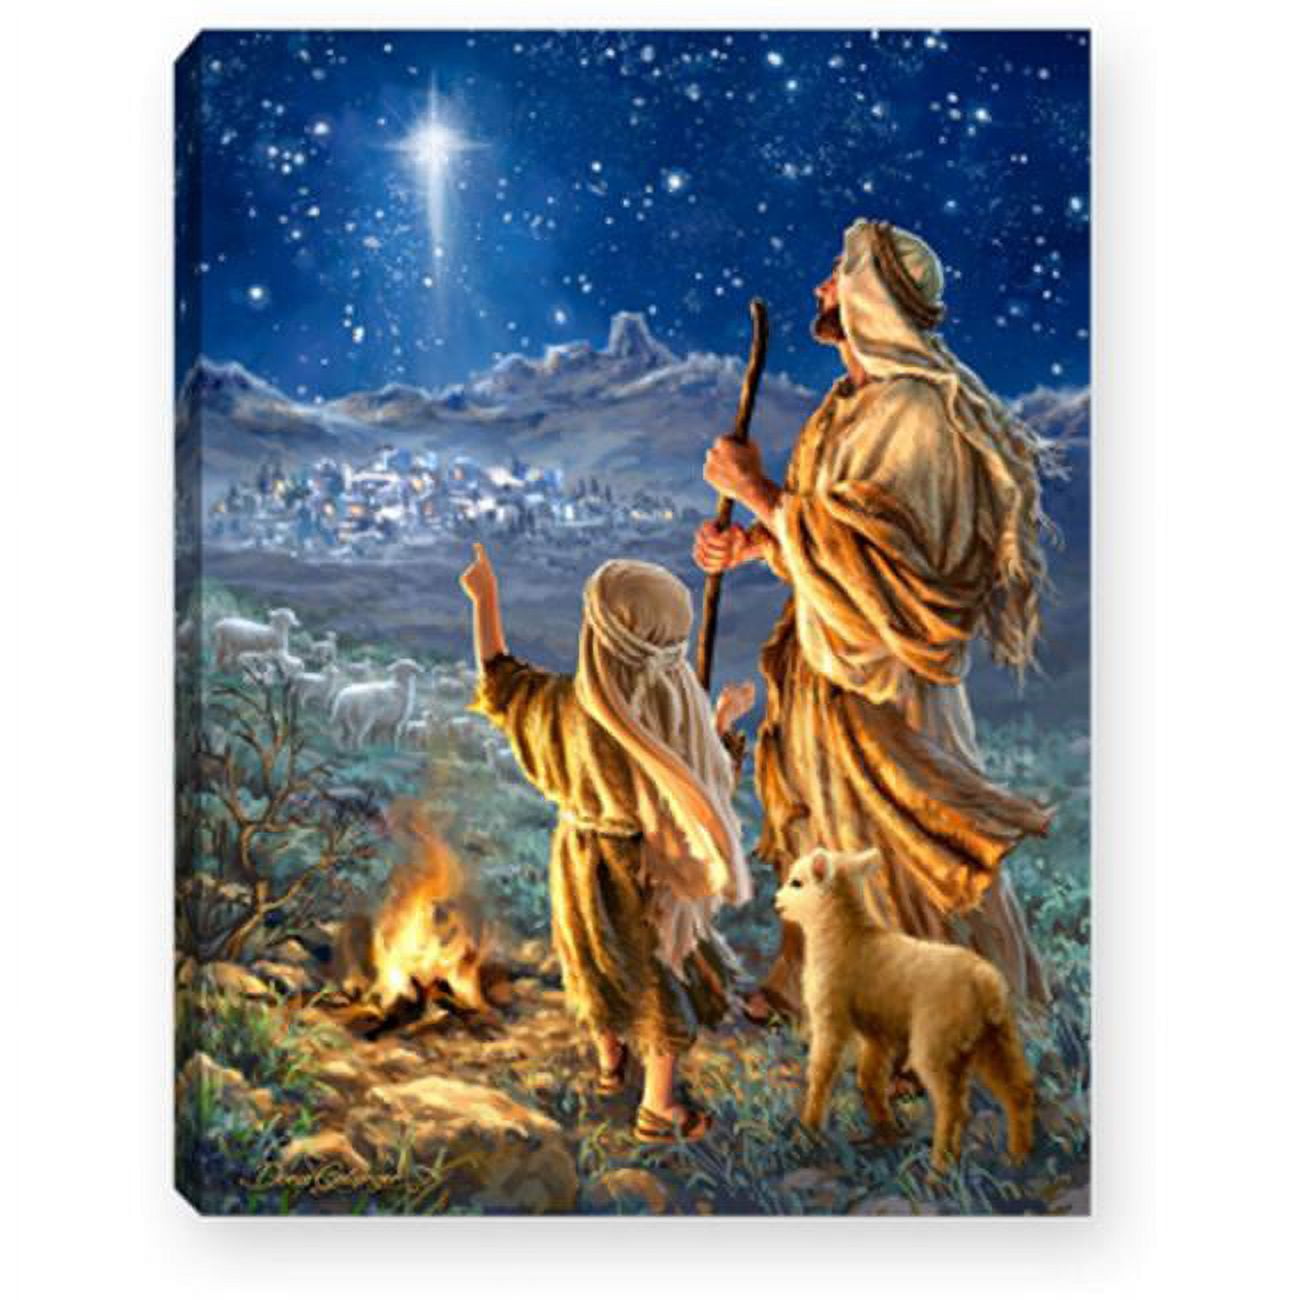 Glow Decor 137713 8 X 6 In. Shepherds Keeping Watch-led Tabletop Mini Canvas With Timer